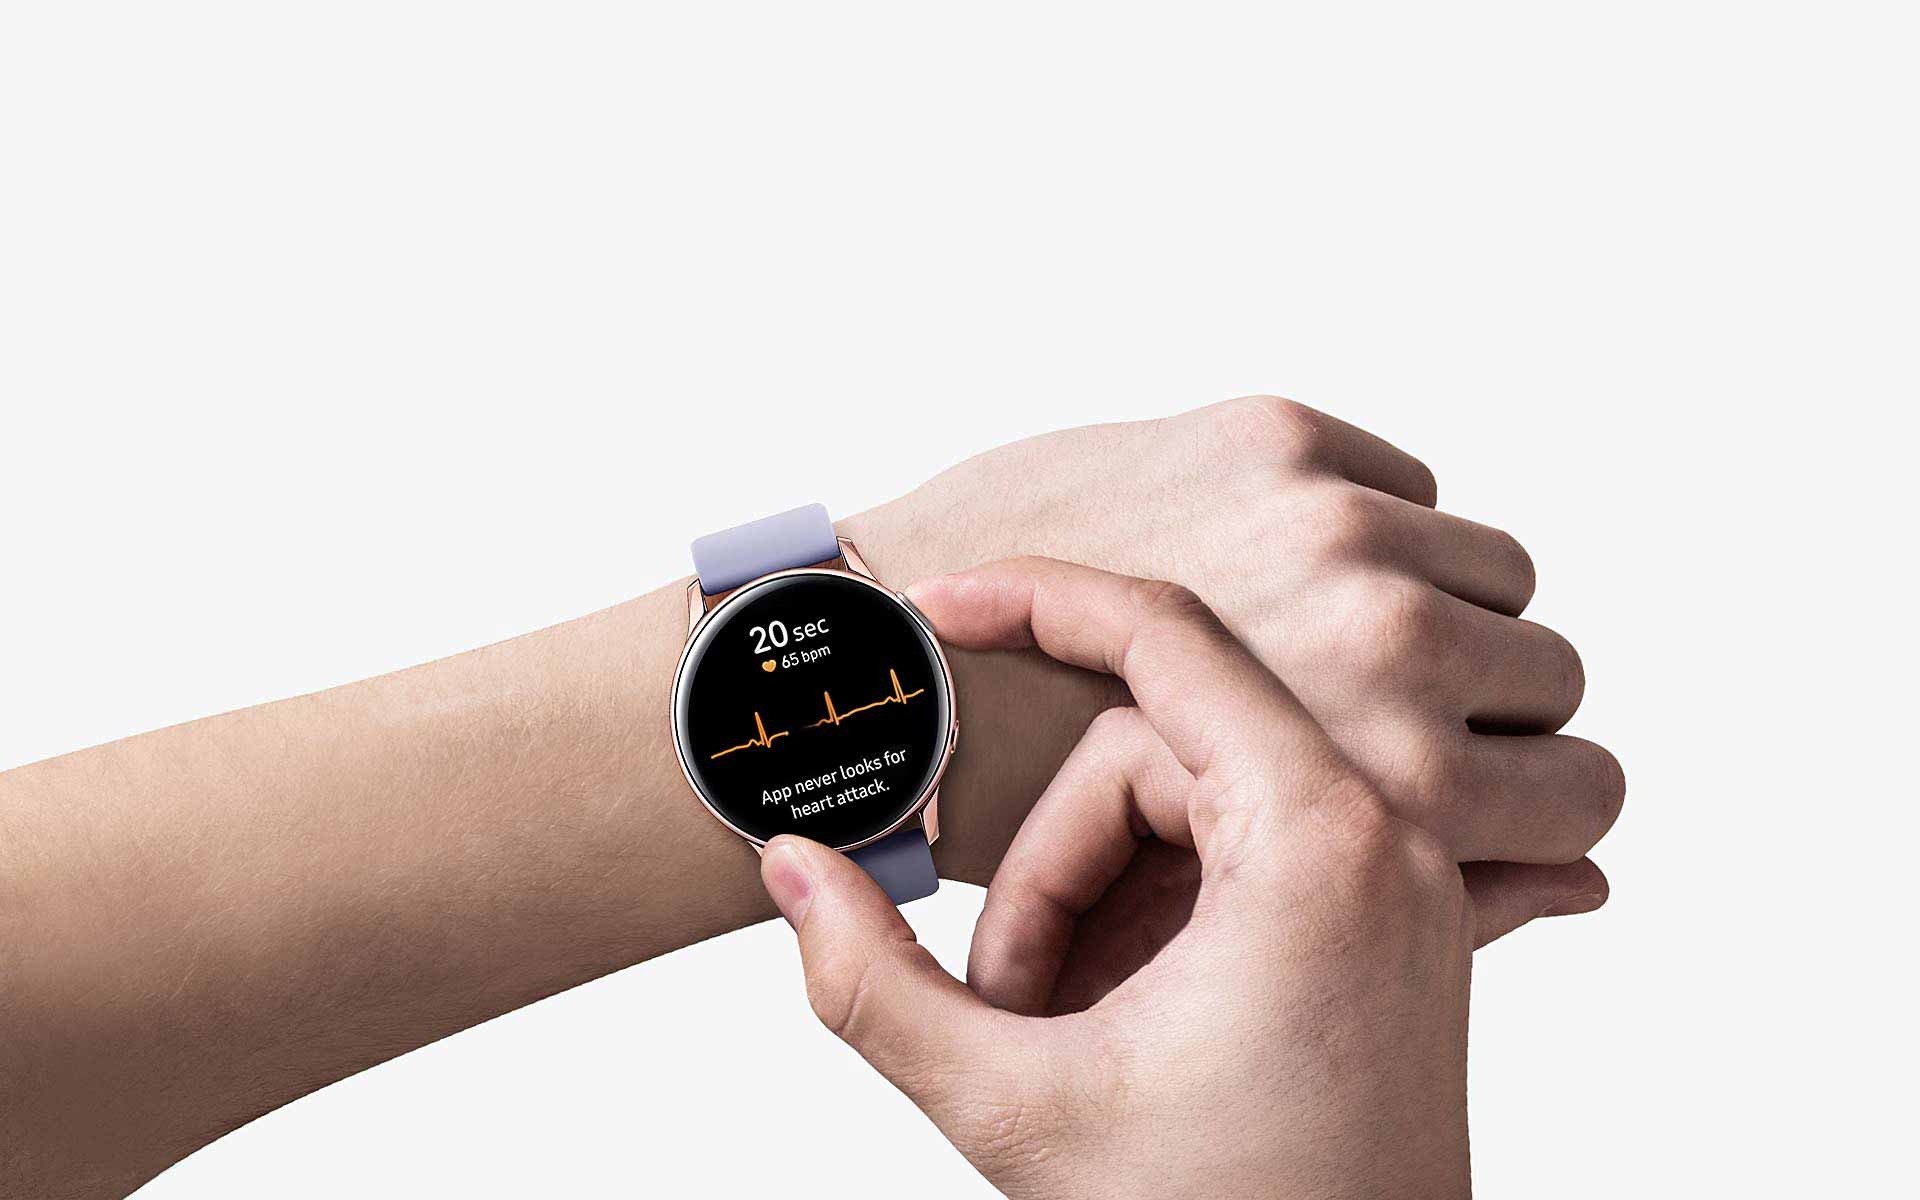 A person wears the Black Galaxy Watch Active2 with only their arms showing. A hand presses a button on the watch's side, and ECG measurements are shown on the watch face.